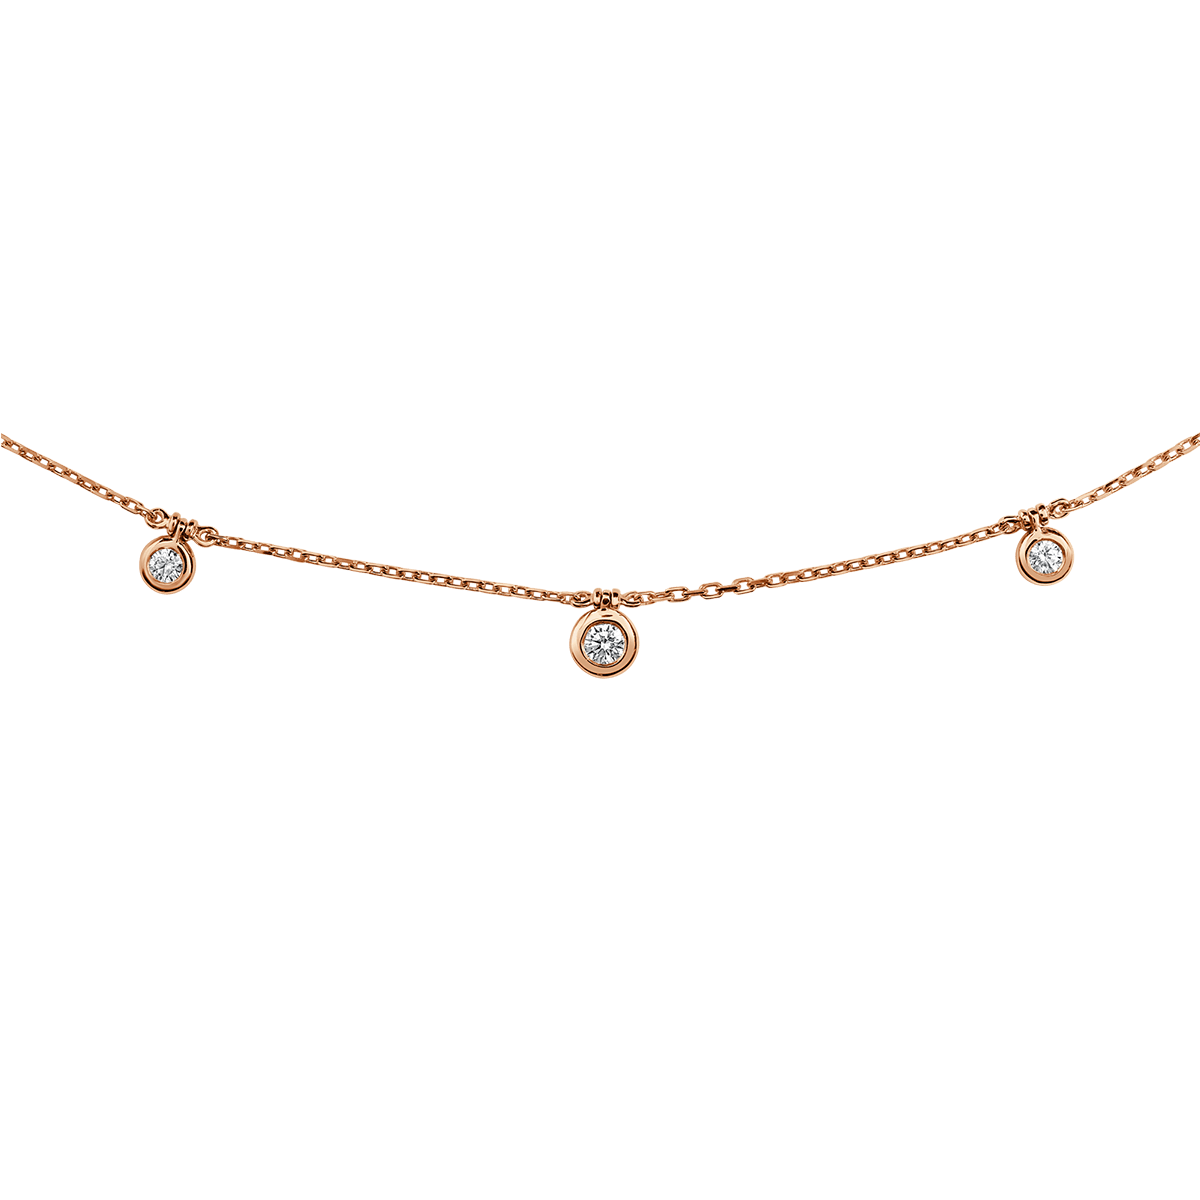 Seven Graduated Round Bezel Diamond Small Necklace In 18 K Rose Gold From Chokers Collection